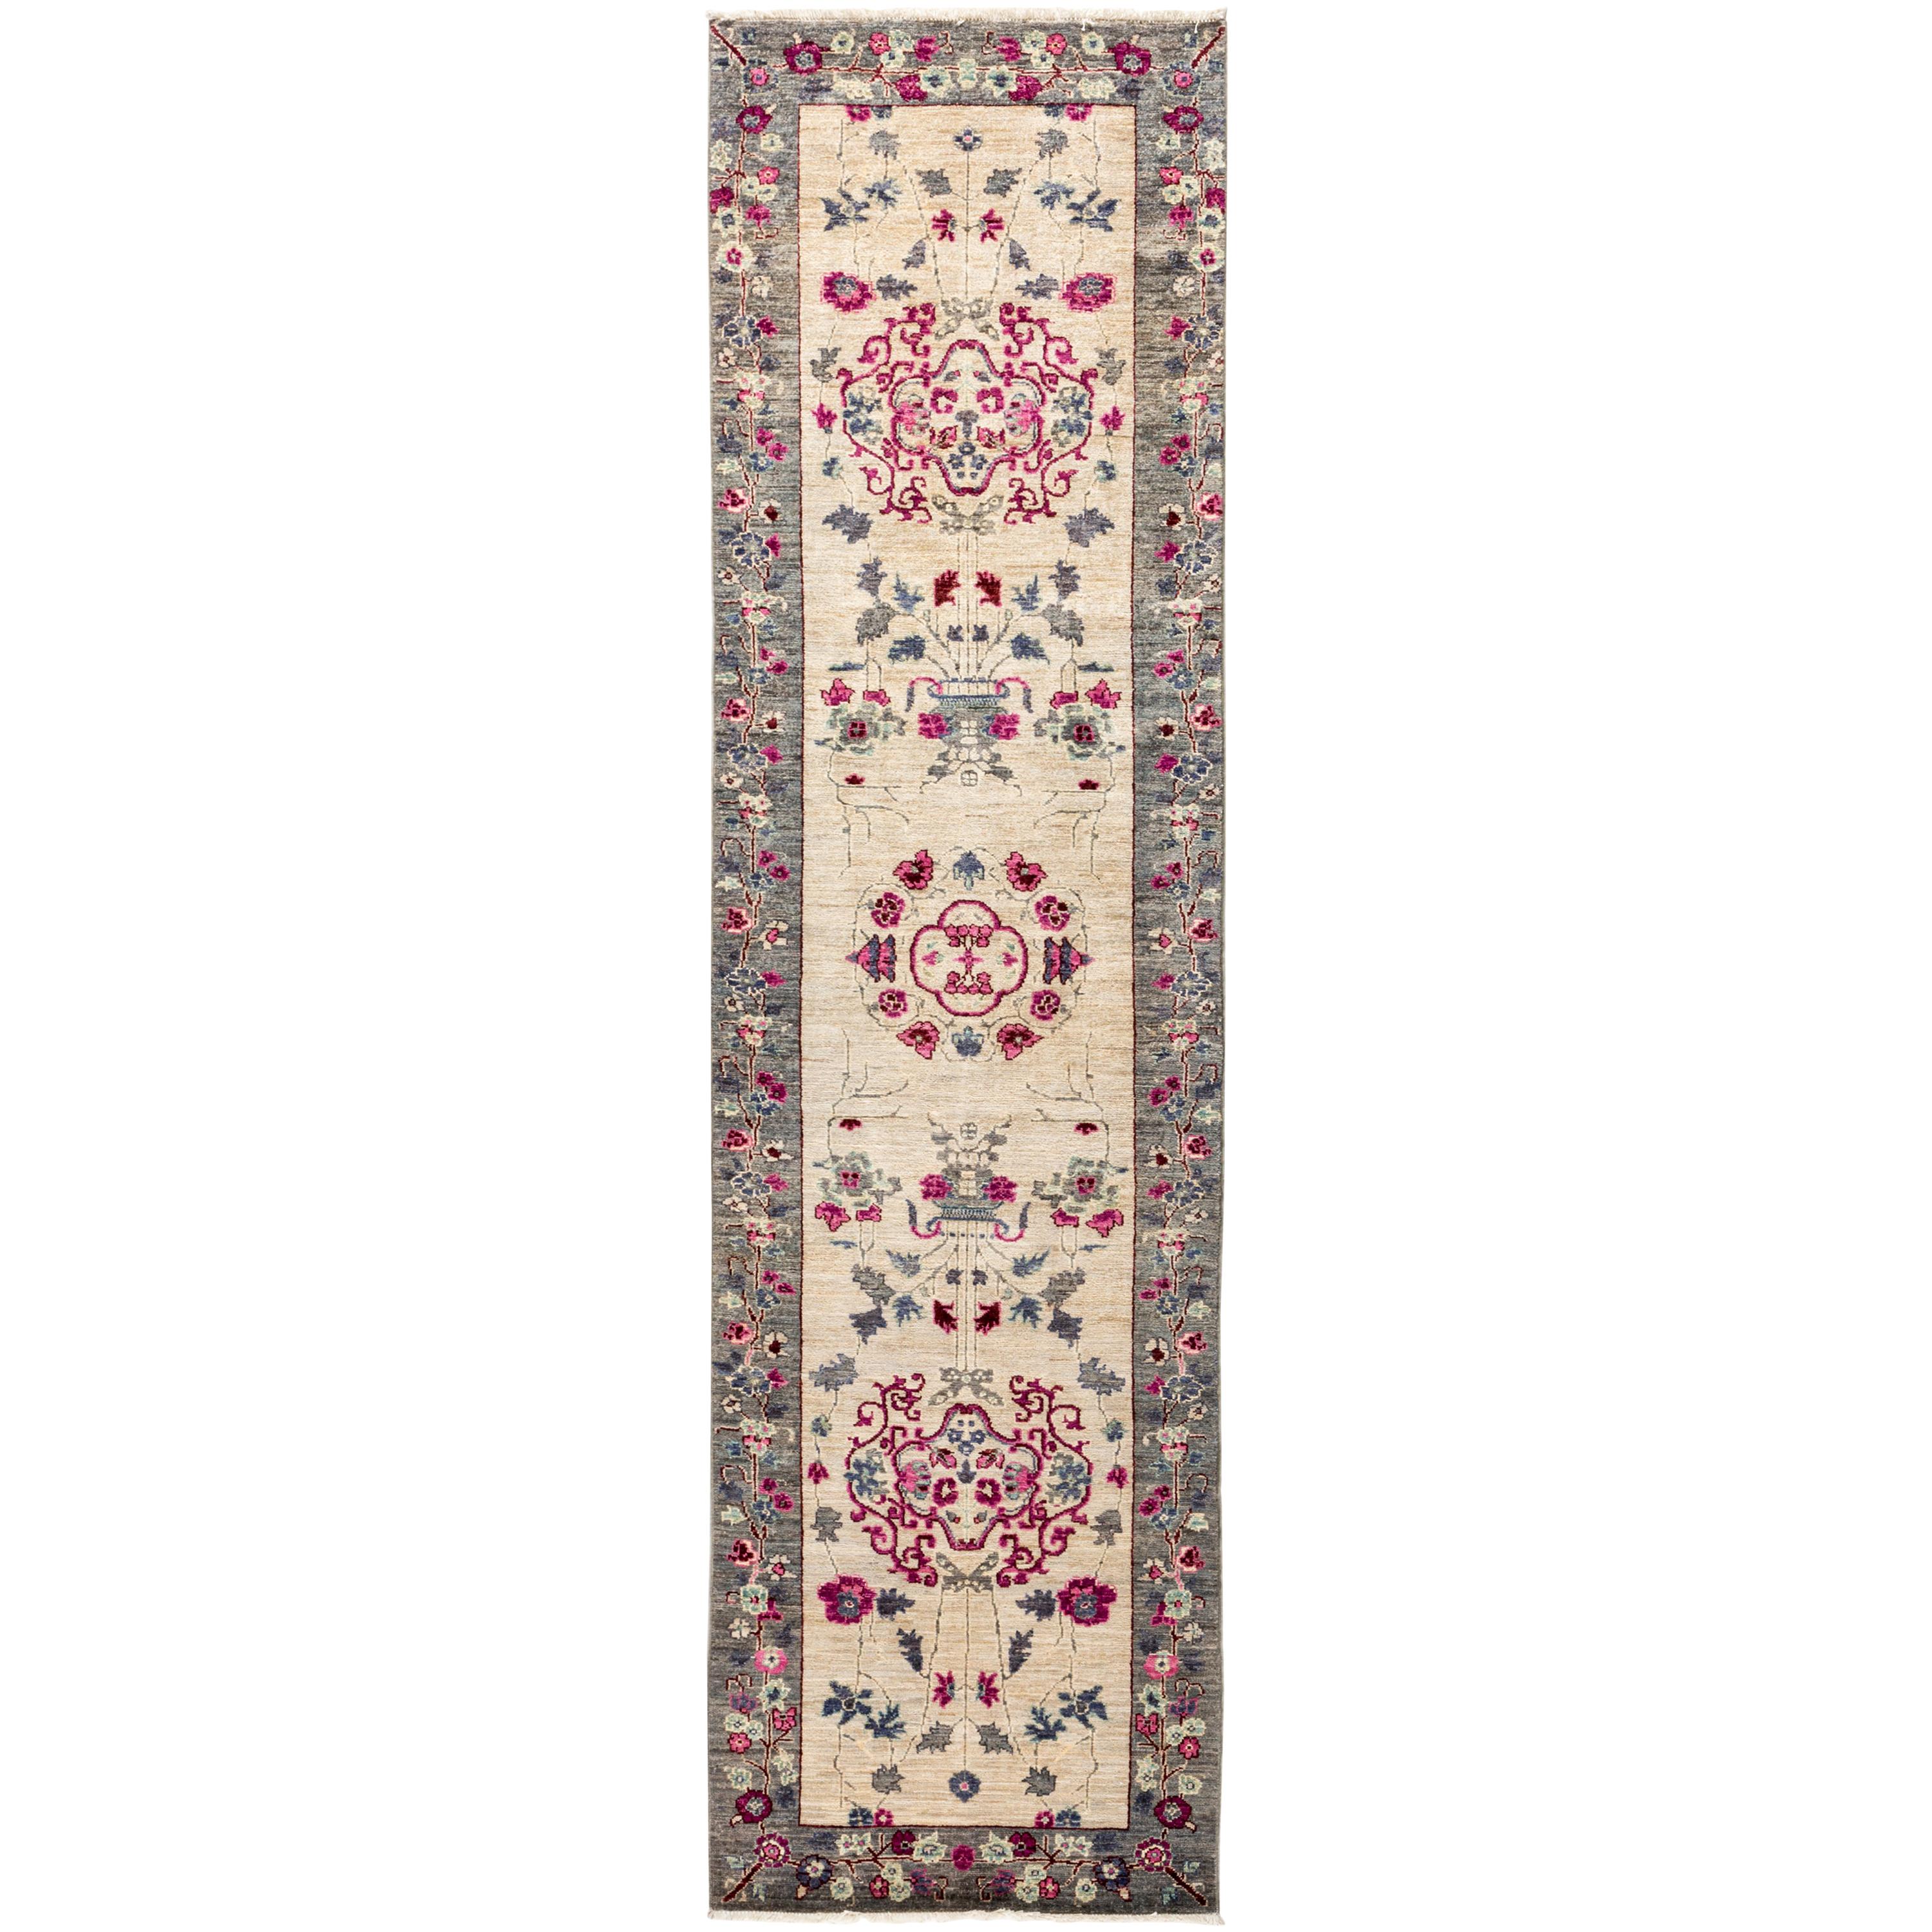 One of a Kind Patterned and Floral Wool Hand Knotted Runner Rug, Ivory